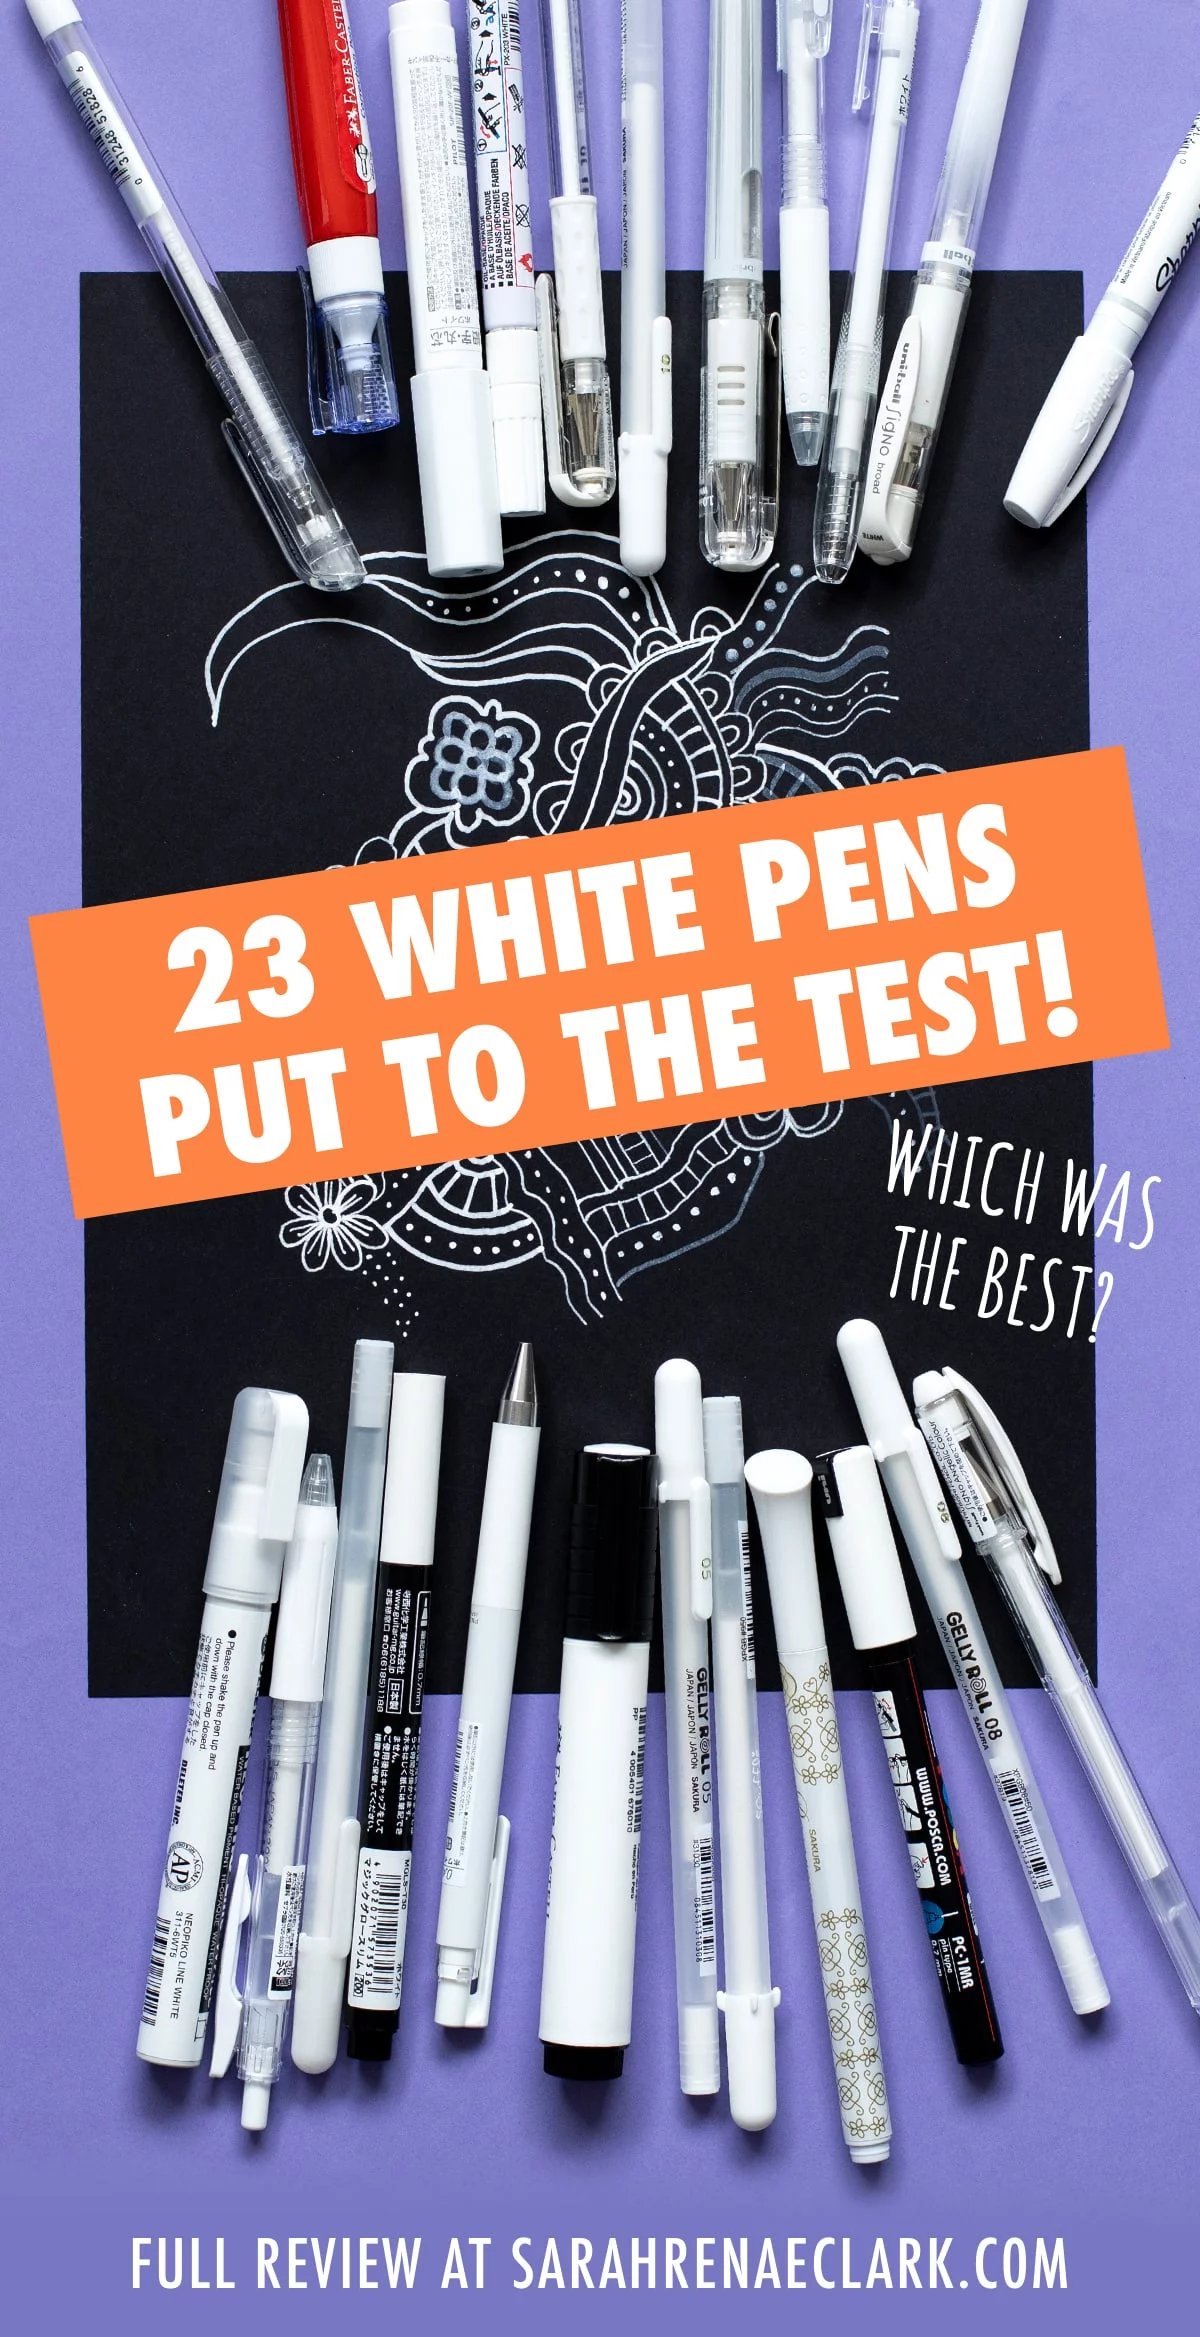 Choosing the Best White Pen for Watercolour Doodles! Testing Acrylic Markers,  Gel Pens and Paint 